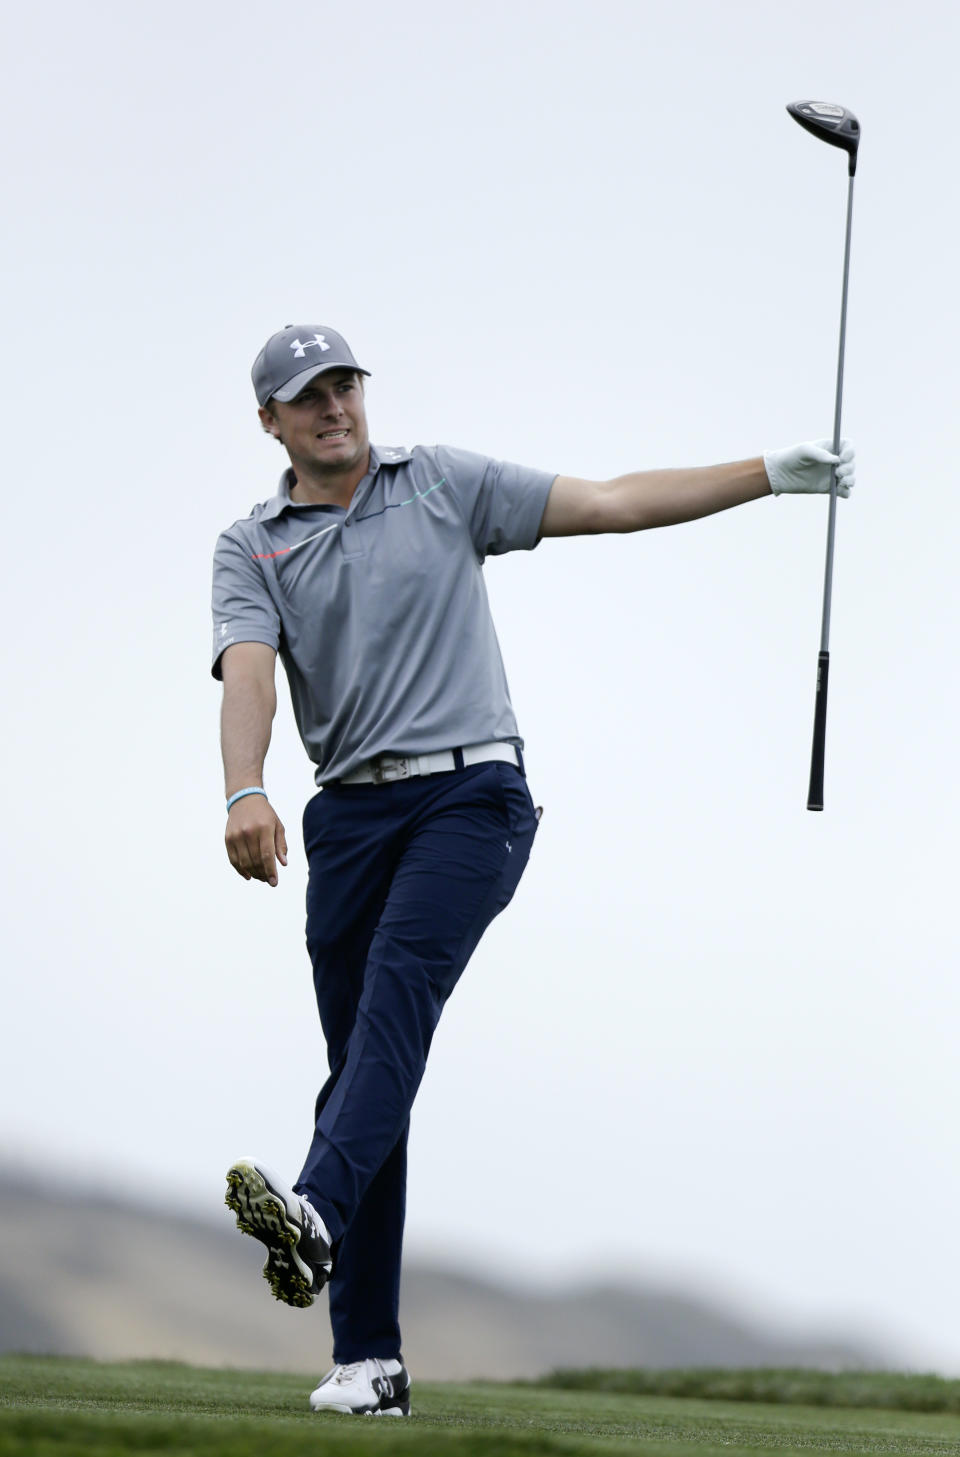 Jordan Spieth reacts as his tee shot flies to the left of the fairway on the fourth hole of the South Course at Torrey Pines during the final round of the Farmers Insurance Open golf tournament Sunday, Jan. 26, 2014, in San Diego. (AP Photo/Gregory Bull)